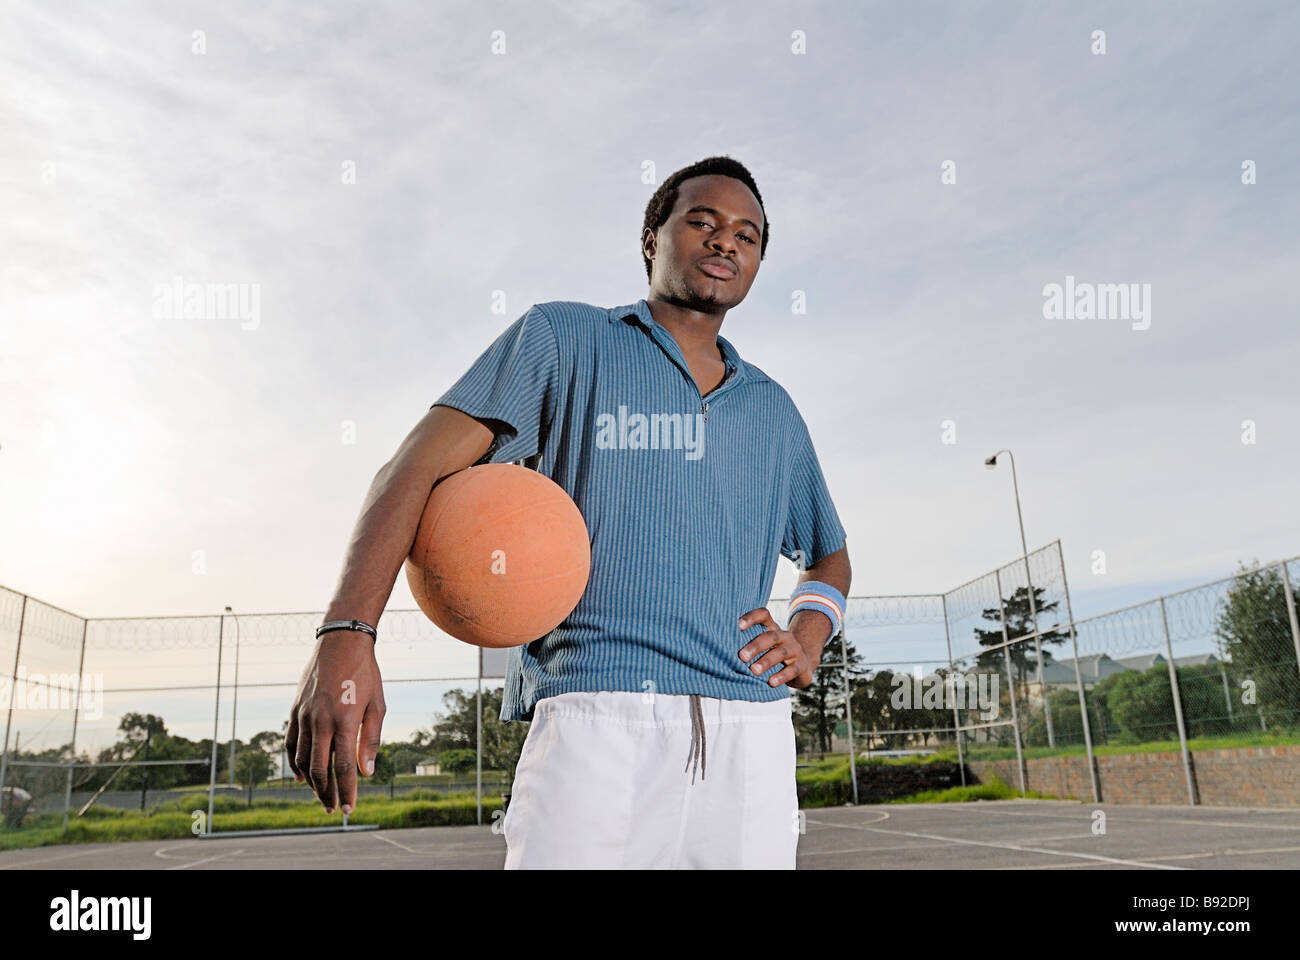 Portrait of a basketball player Cape Town Mowbray Western Cape Province South Africa Stock Photo